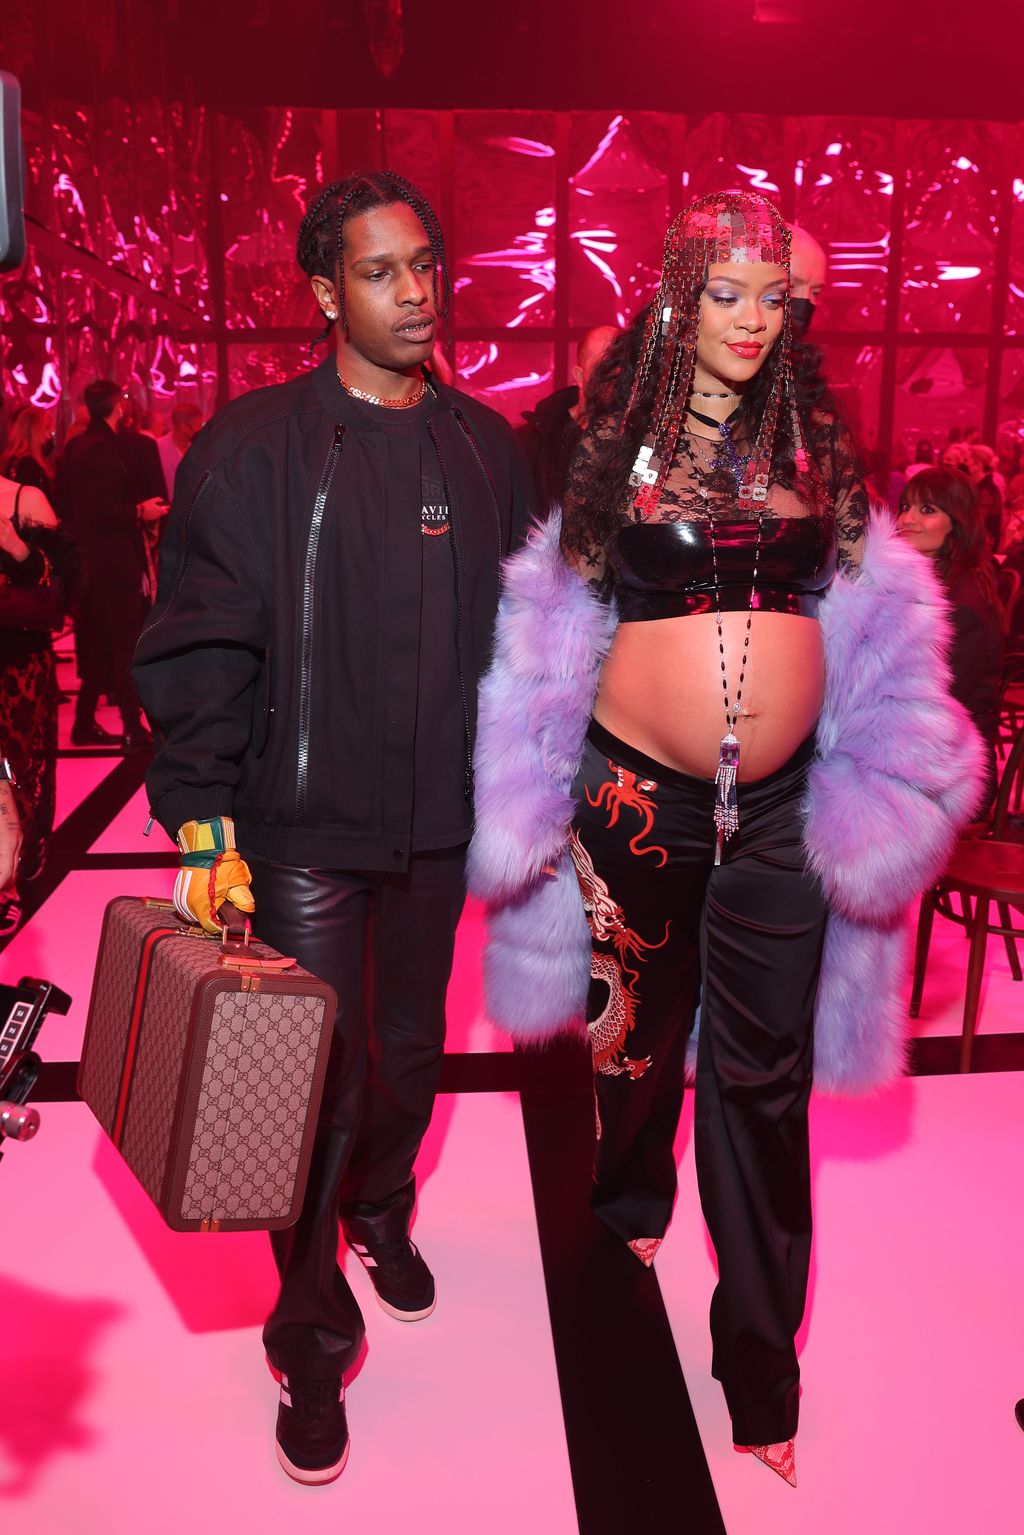 MILAN, ITALY - FEBRUARY 25: Asap Rocky and Rihanna are seen at the Gucci show during Milan Fashion Week Fall/Winter 2022/23 on February 25, 2022 in Milan, Italy. (Photo by Jacopo M. Raule/Getty Images for Gucci)